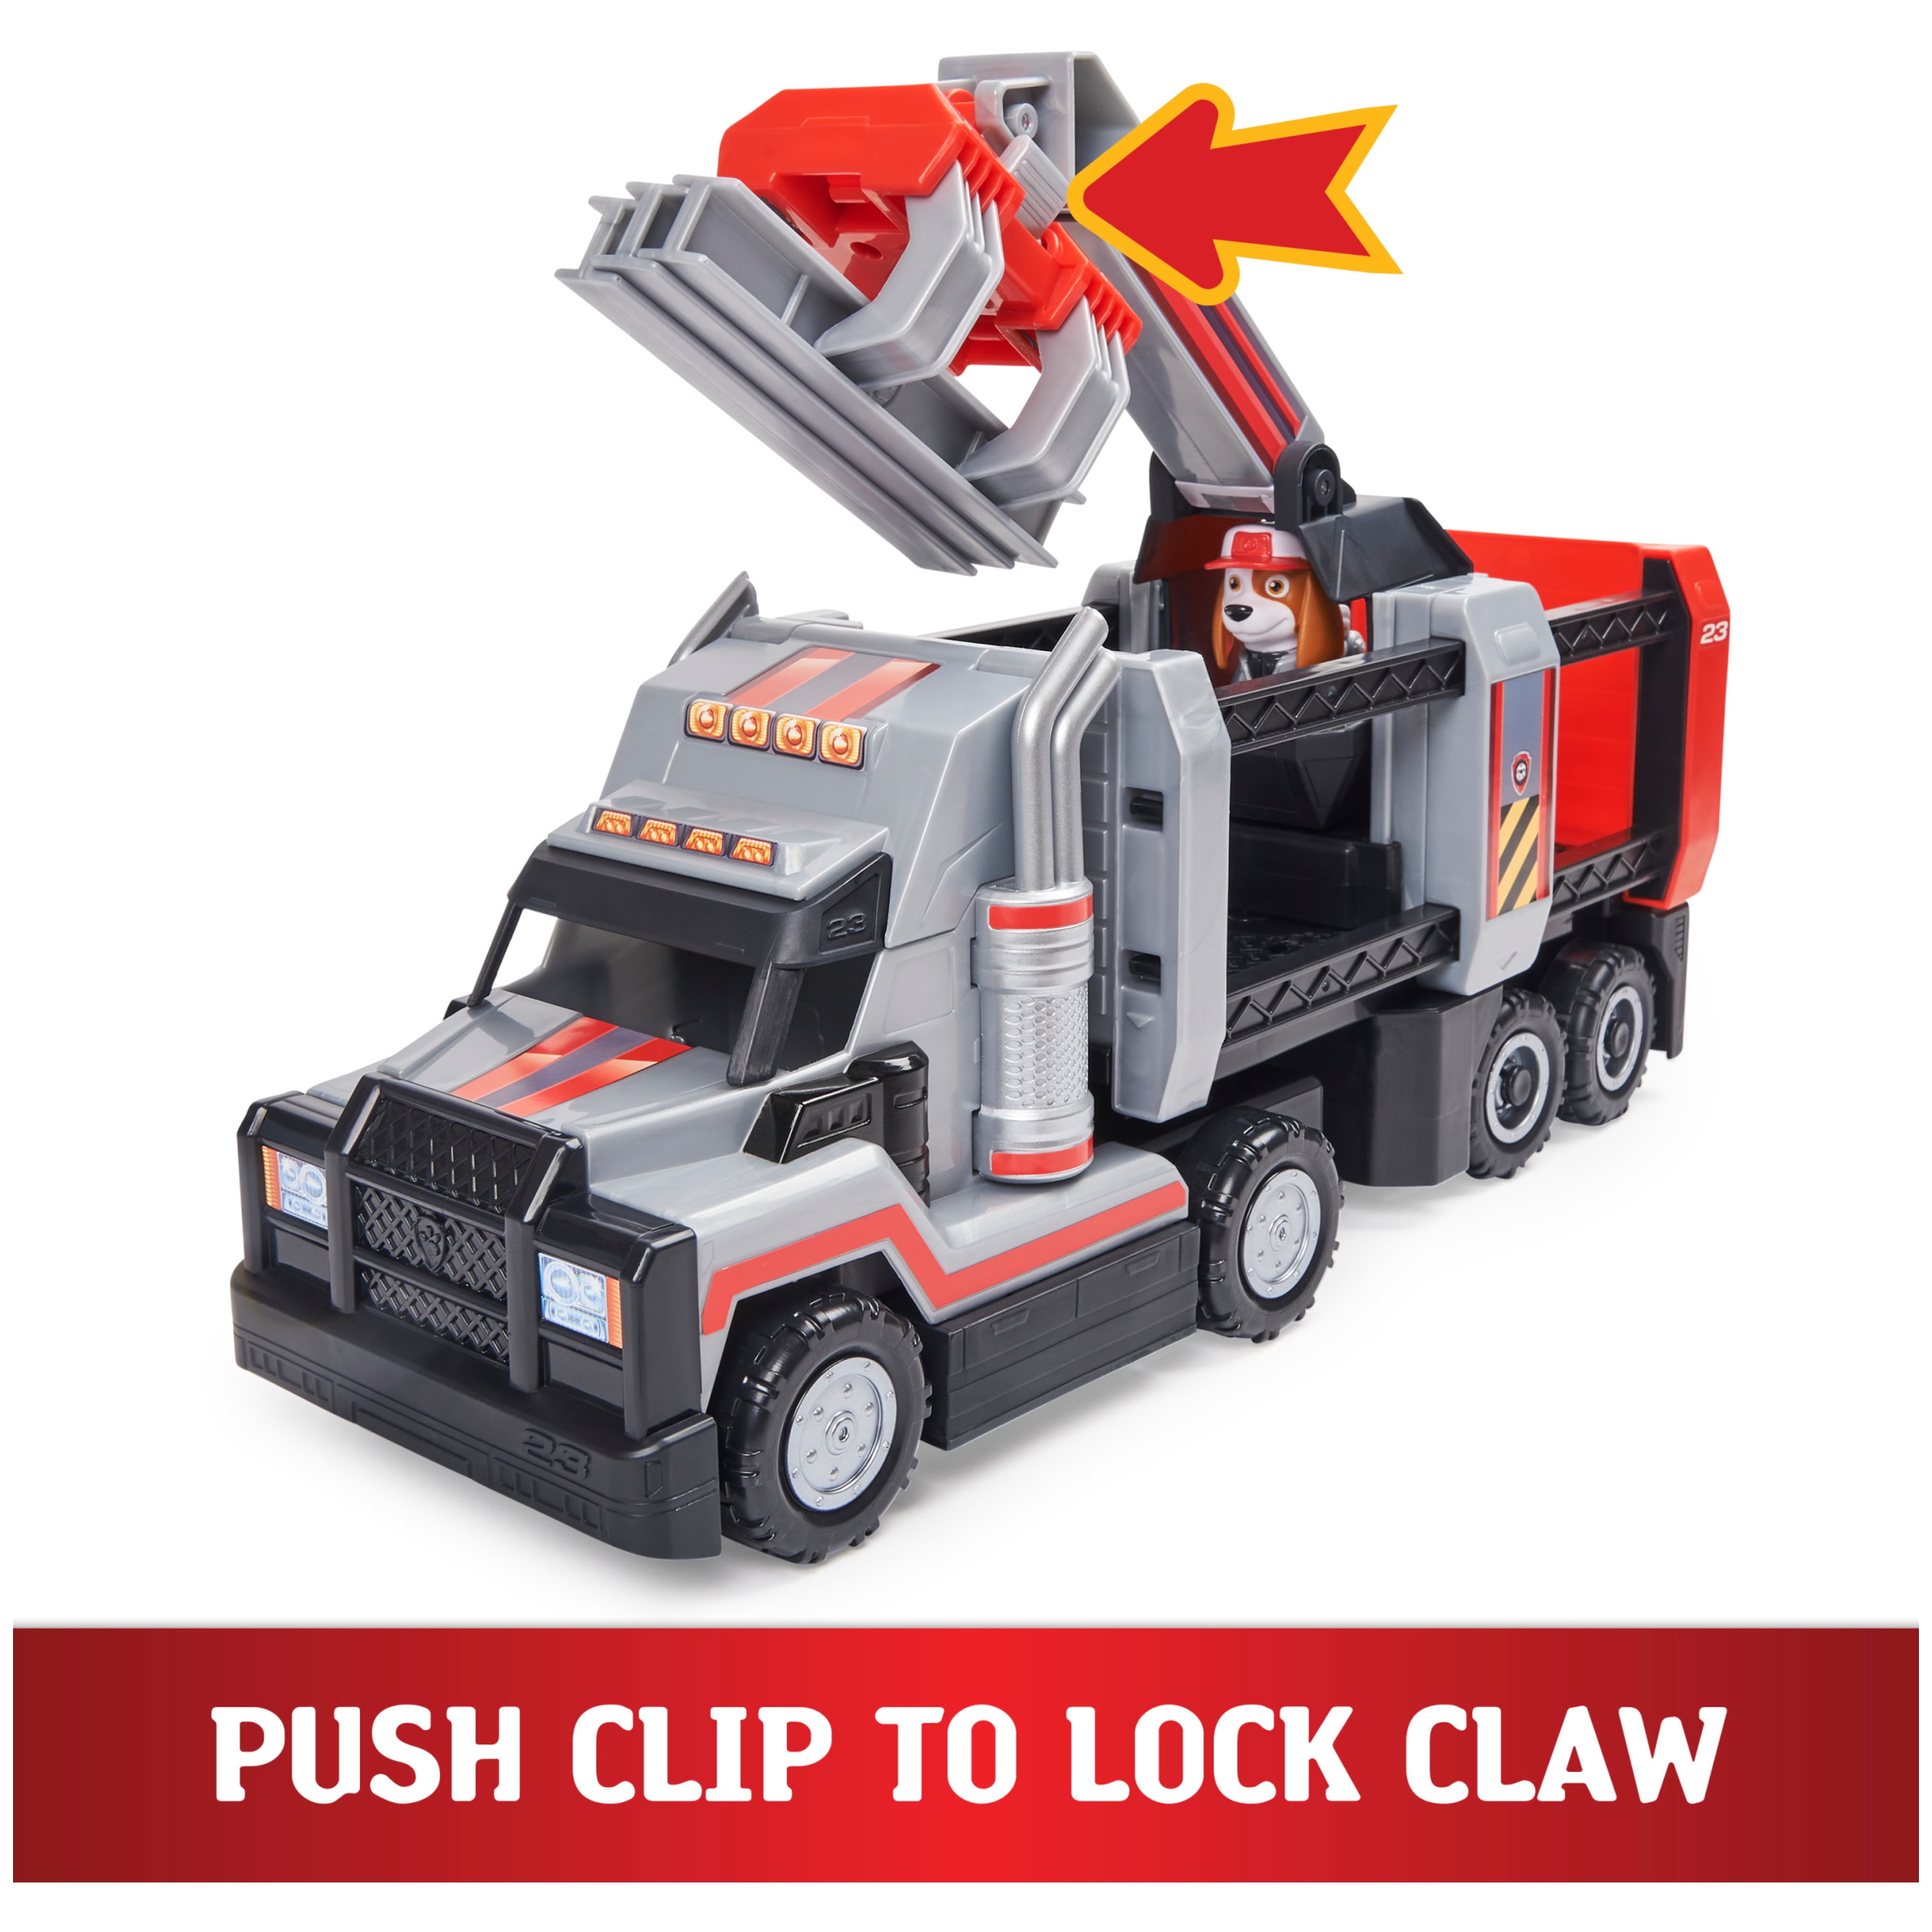 PAW Patrol, Al’s Deluxe Big Truck Toy with Moveable Claw Arm and Accessories - 3